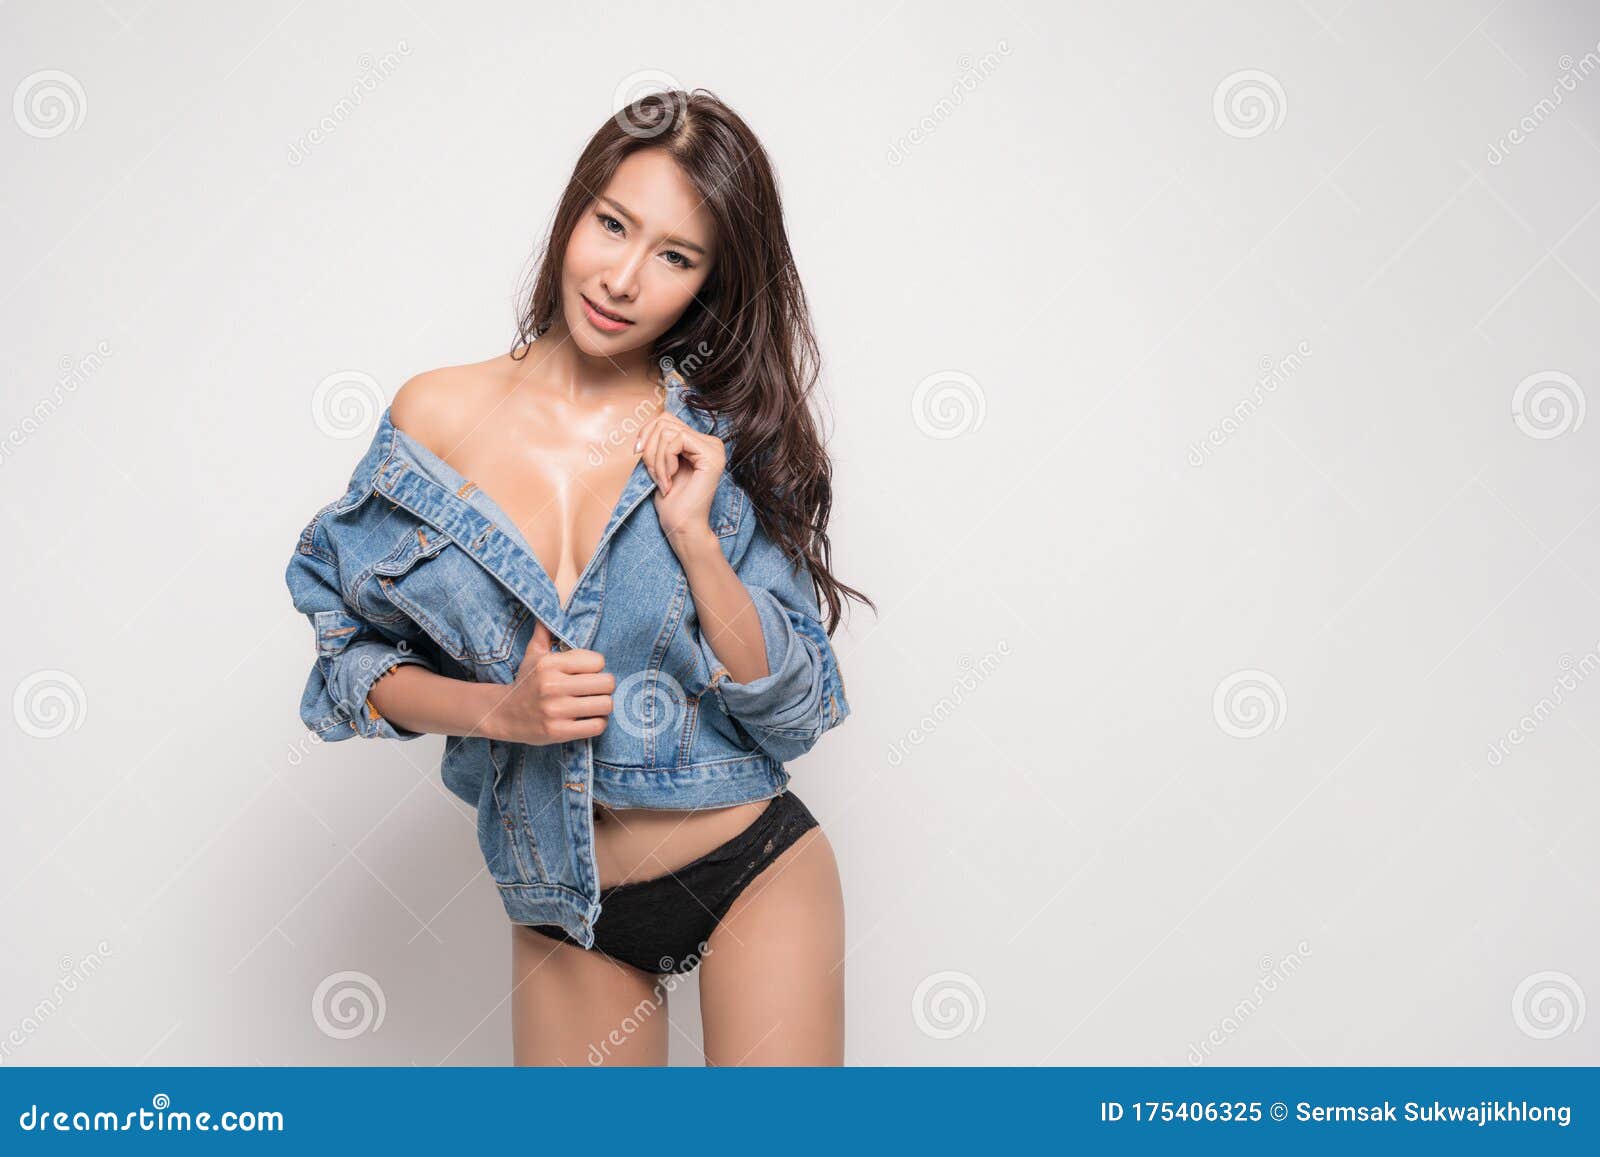 Woman Wearing Blue Jeans Jacket with No Bra Stock Image - Image of